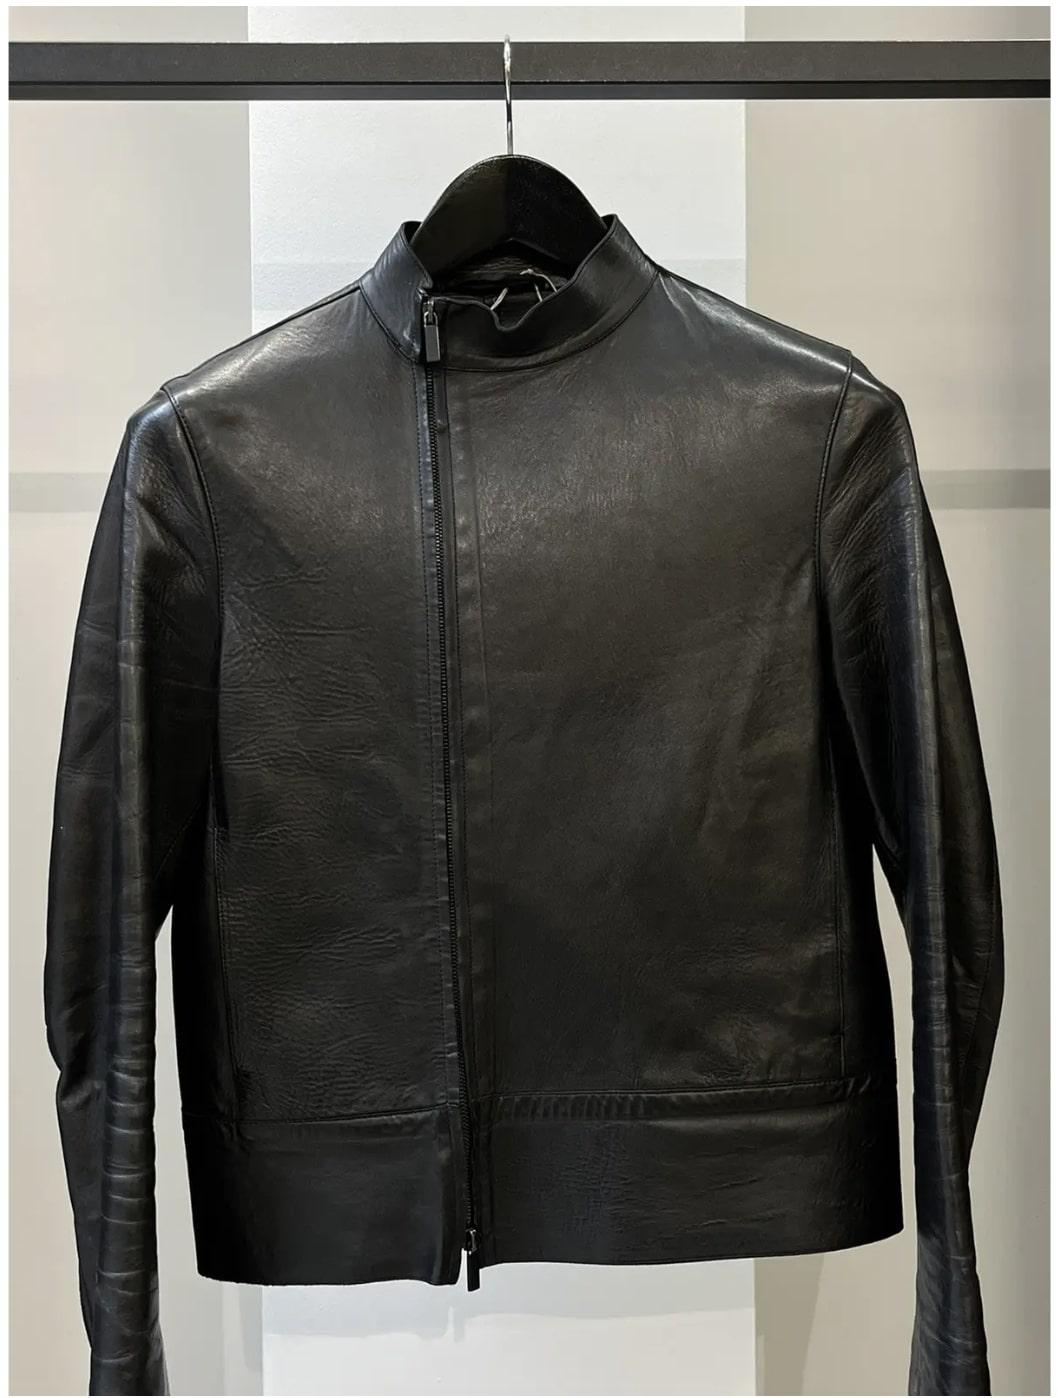 Gucci
Tom Ford FW 1999 Leather Zip Moto Jacket
Size Small

Beautiful Gucci Tom Ford FW99 leather zip moto jacket in a size small. In great condition without flaws, made in Italy. Extremely rare.

